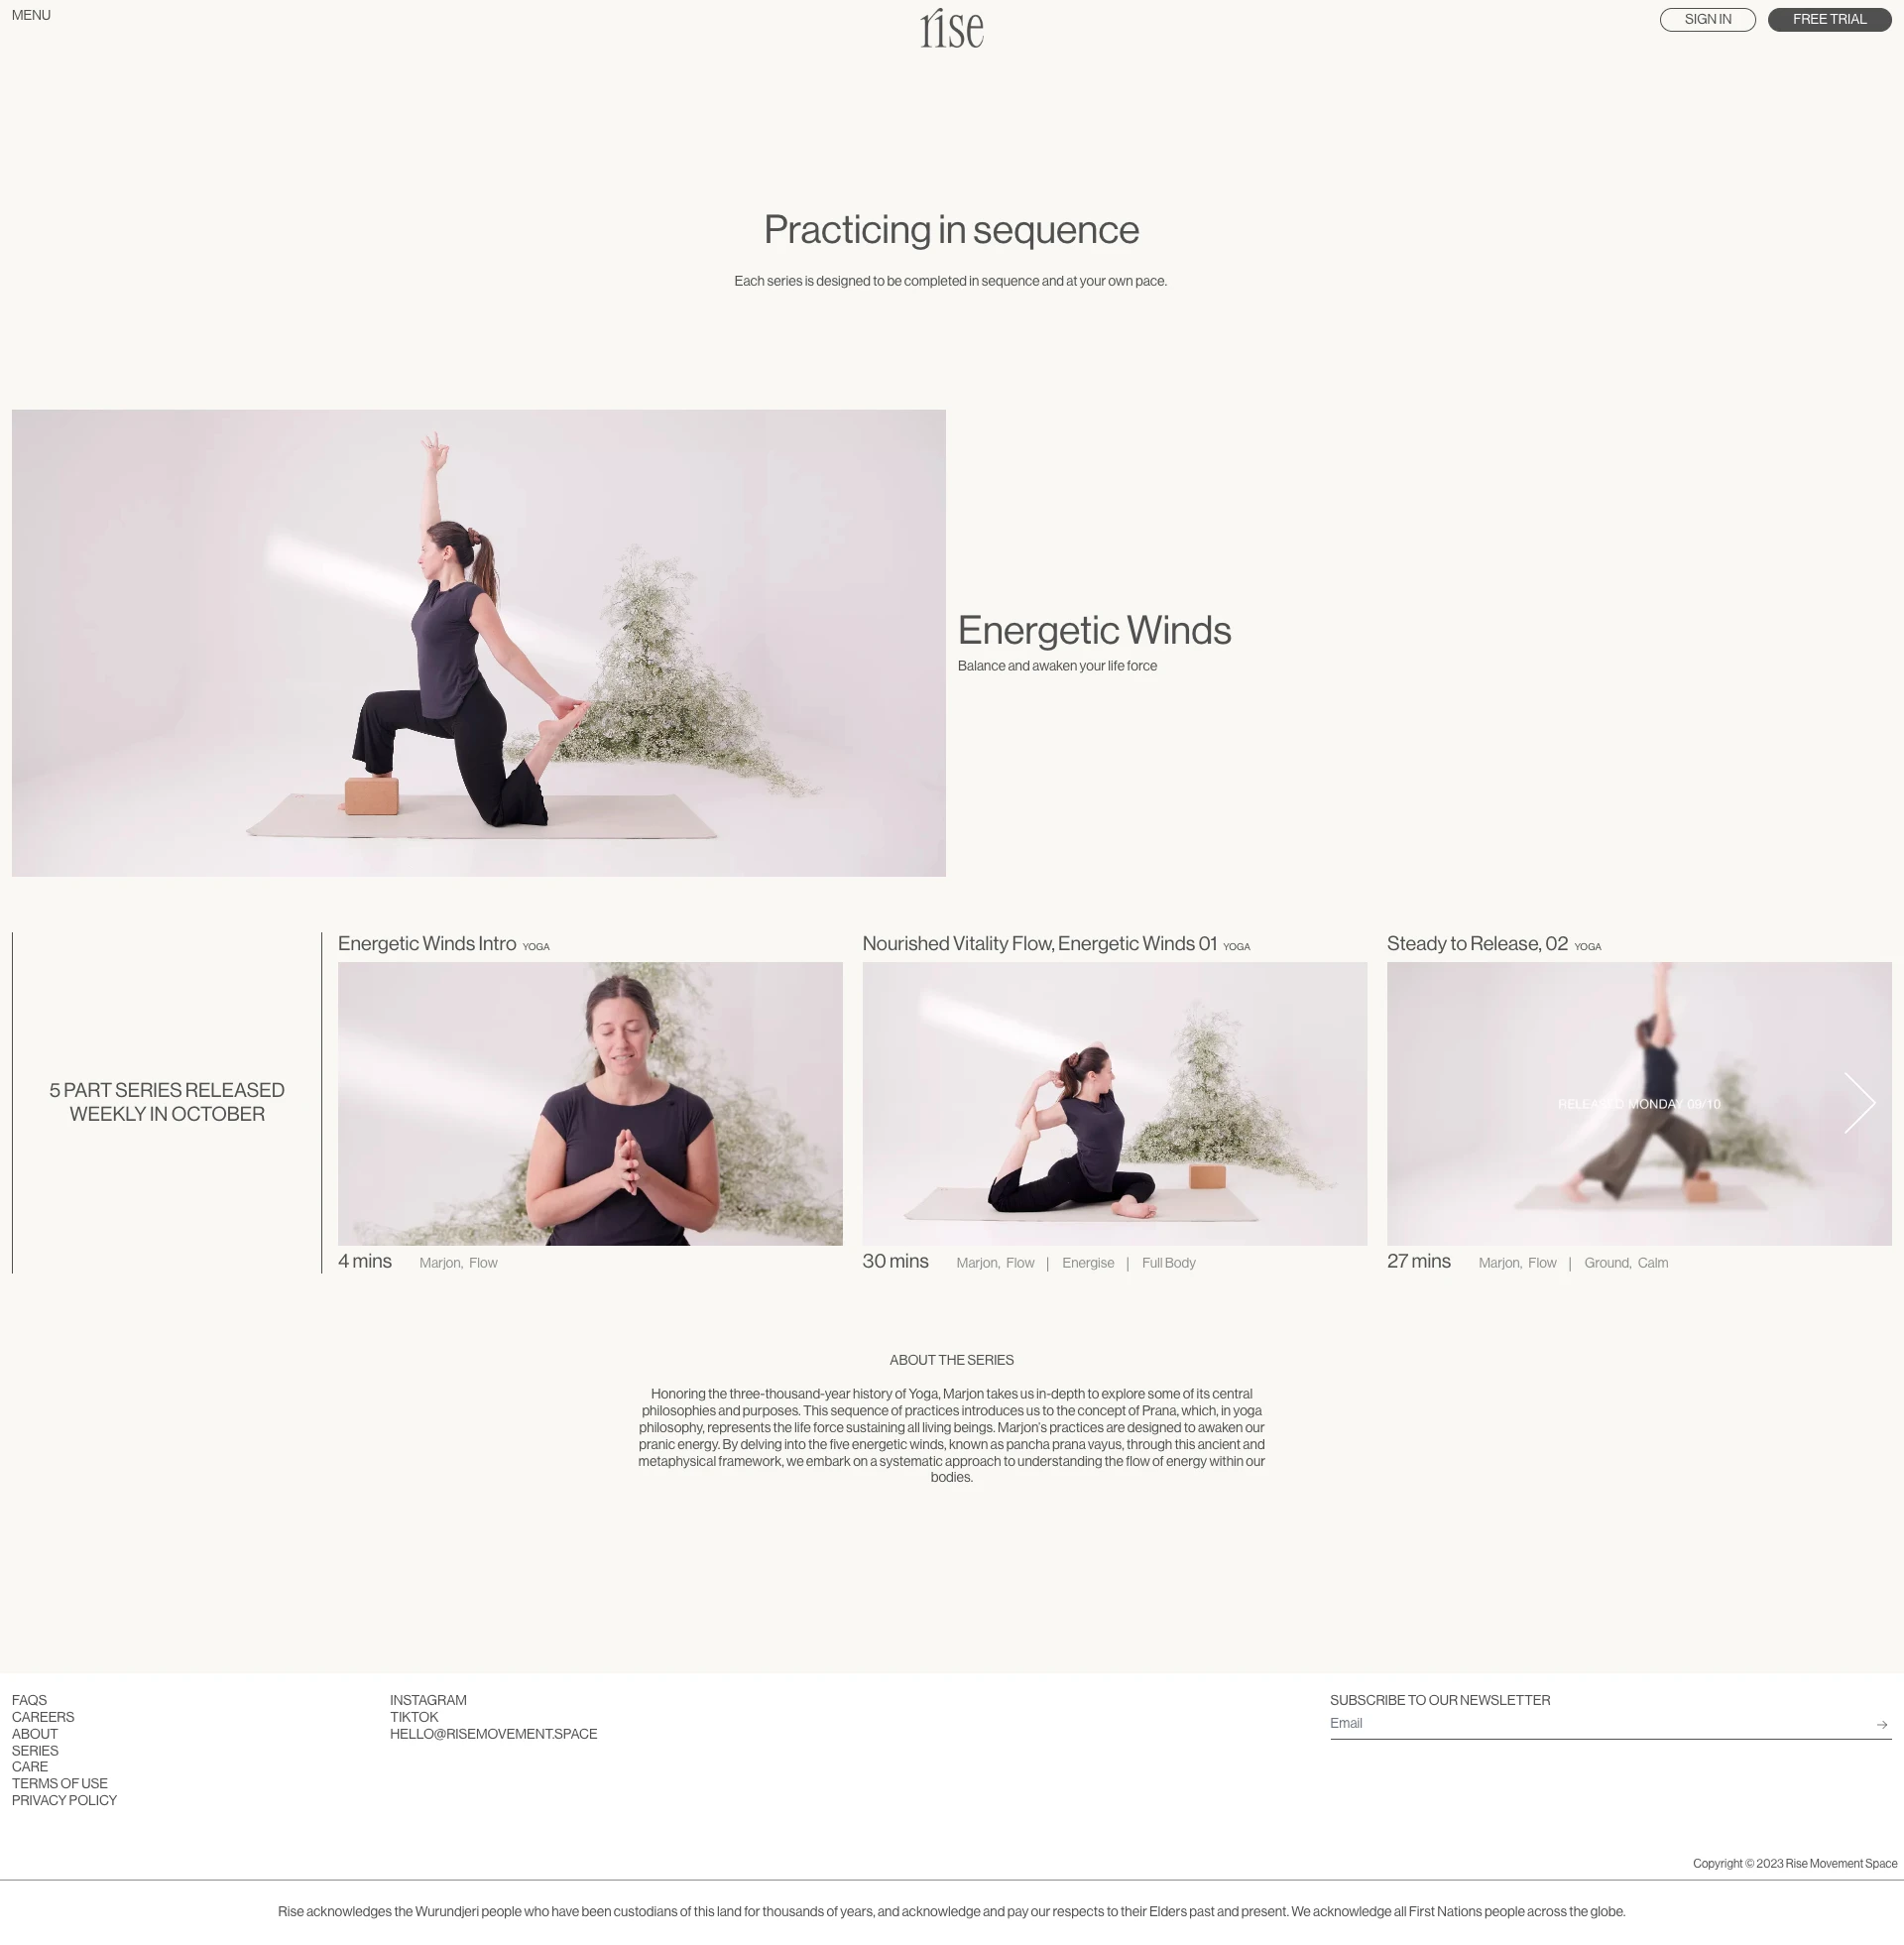 Rise Landing Page Example: Rise is an online wellness and fitness platform linking movement to mindfulness. Our holistic approach emphasises the mind-body connection, inviting awareness, exploration and curiosity into the ways we experience our bodies. This is a space to enliven the senses, create rituals and move deeper.